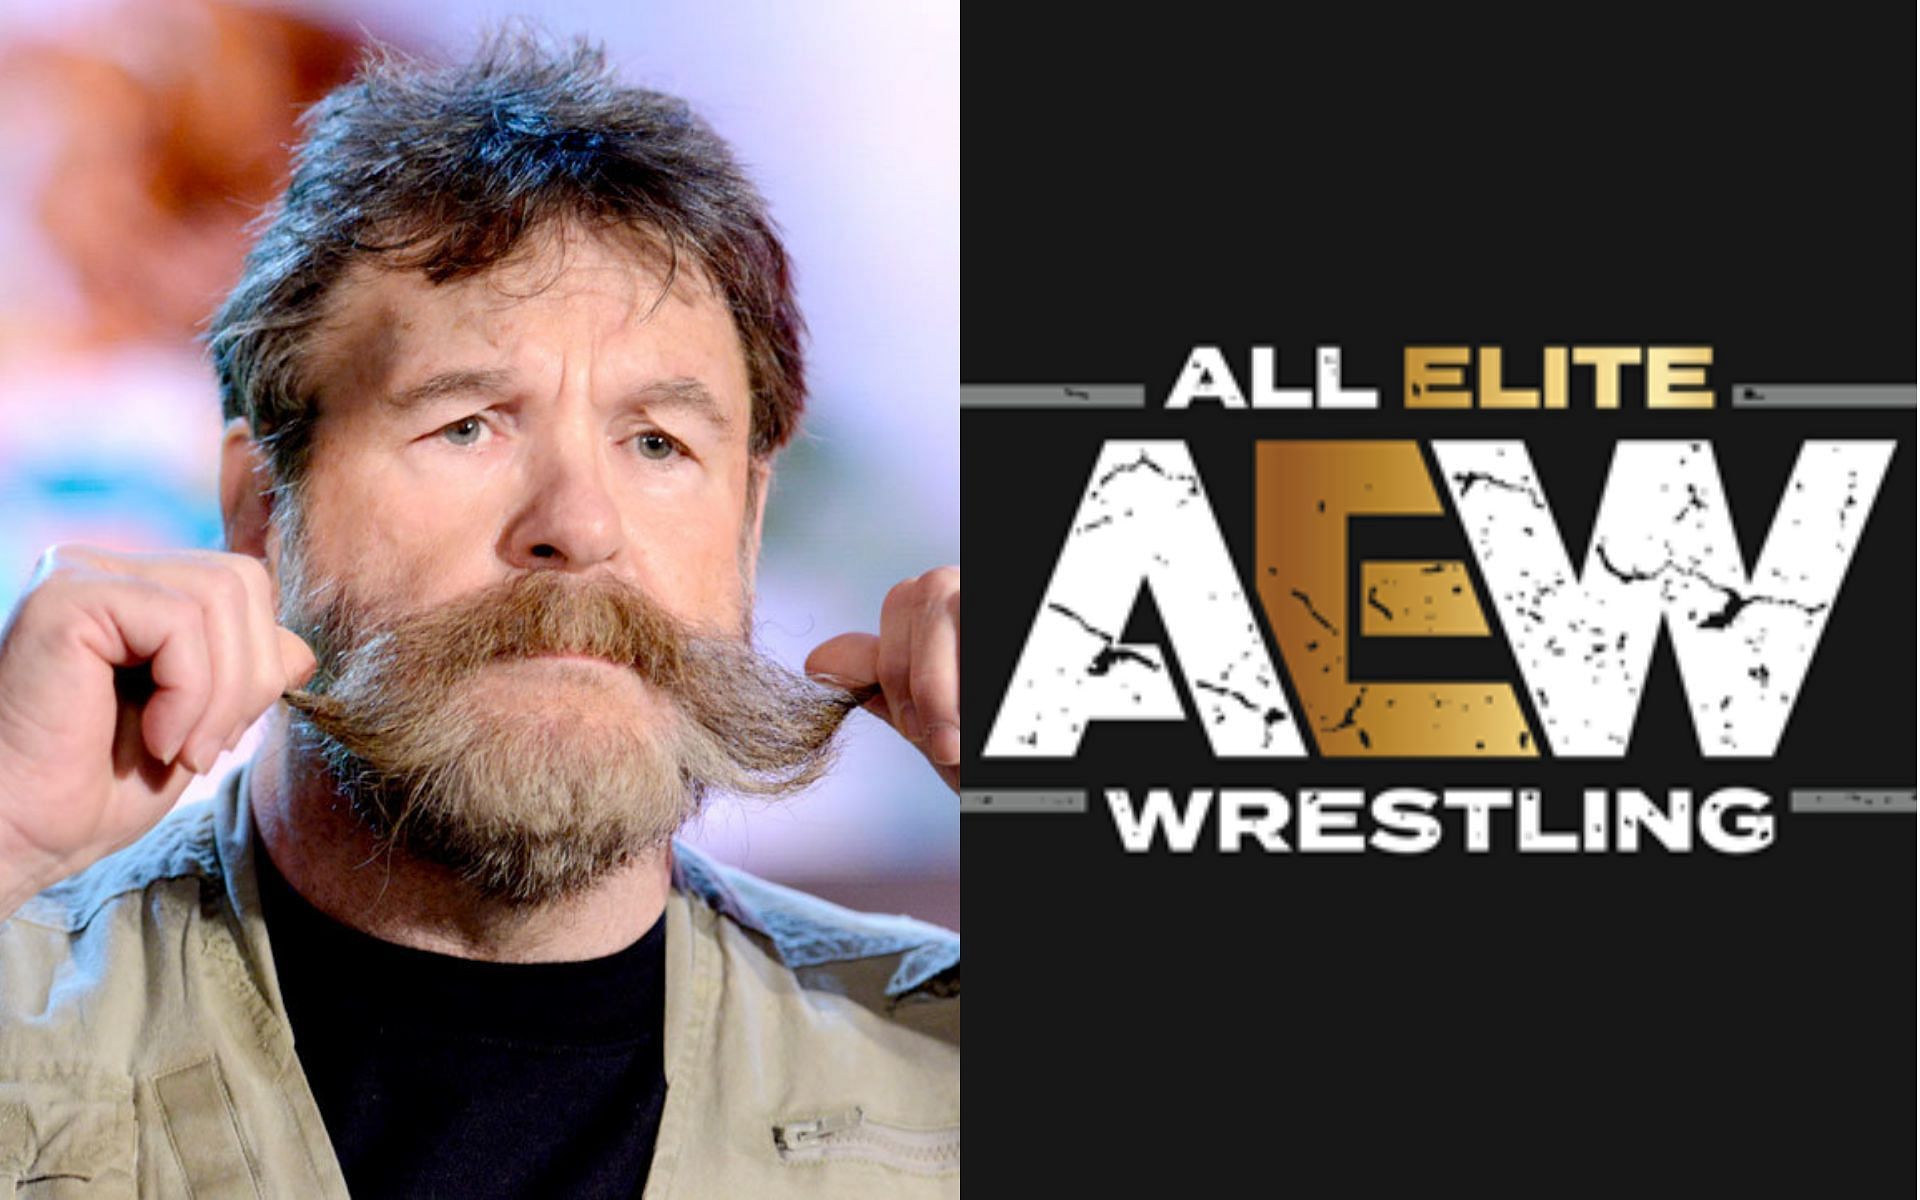 Former WWE manager Dutch Mantell (left) and AEW logo (right).